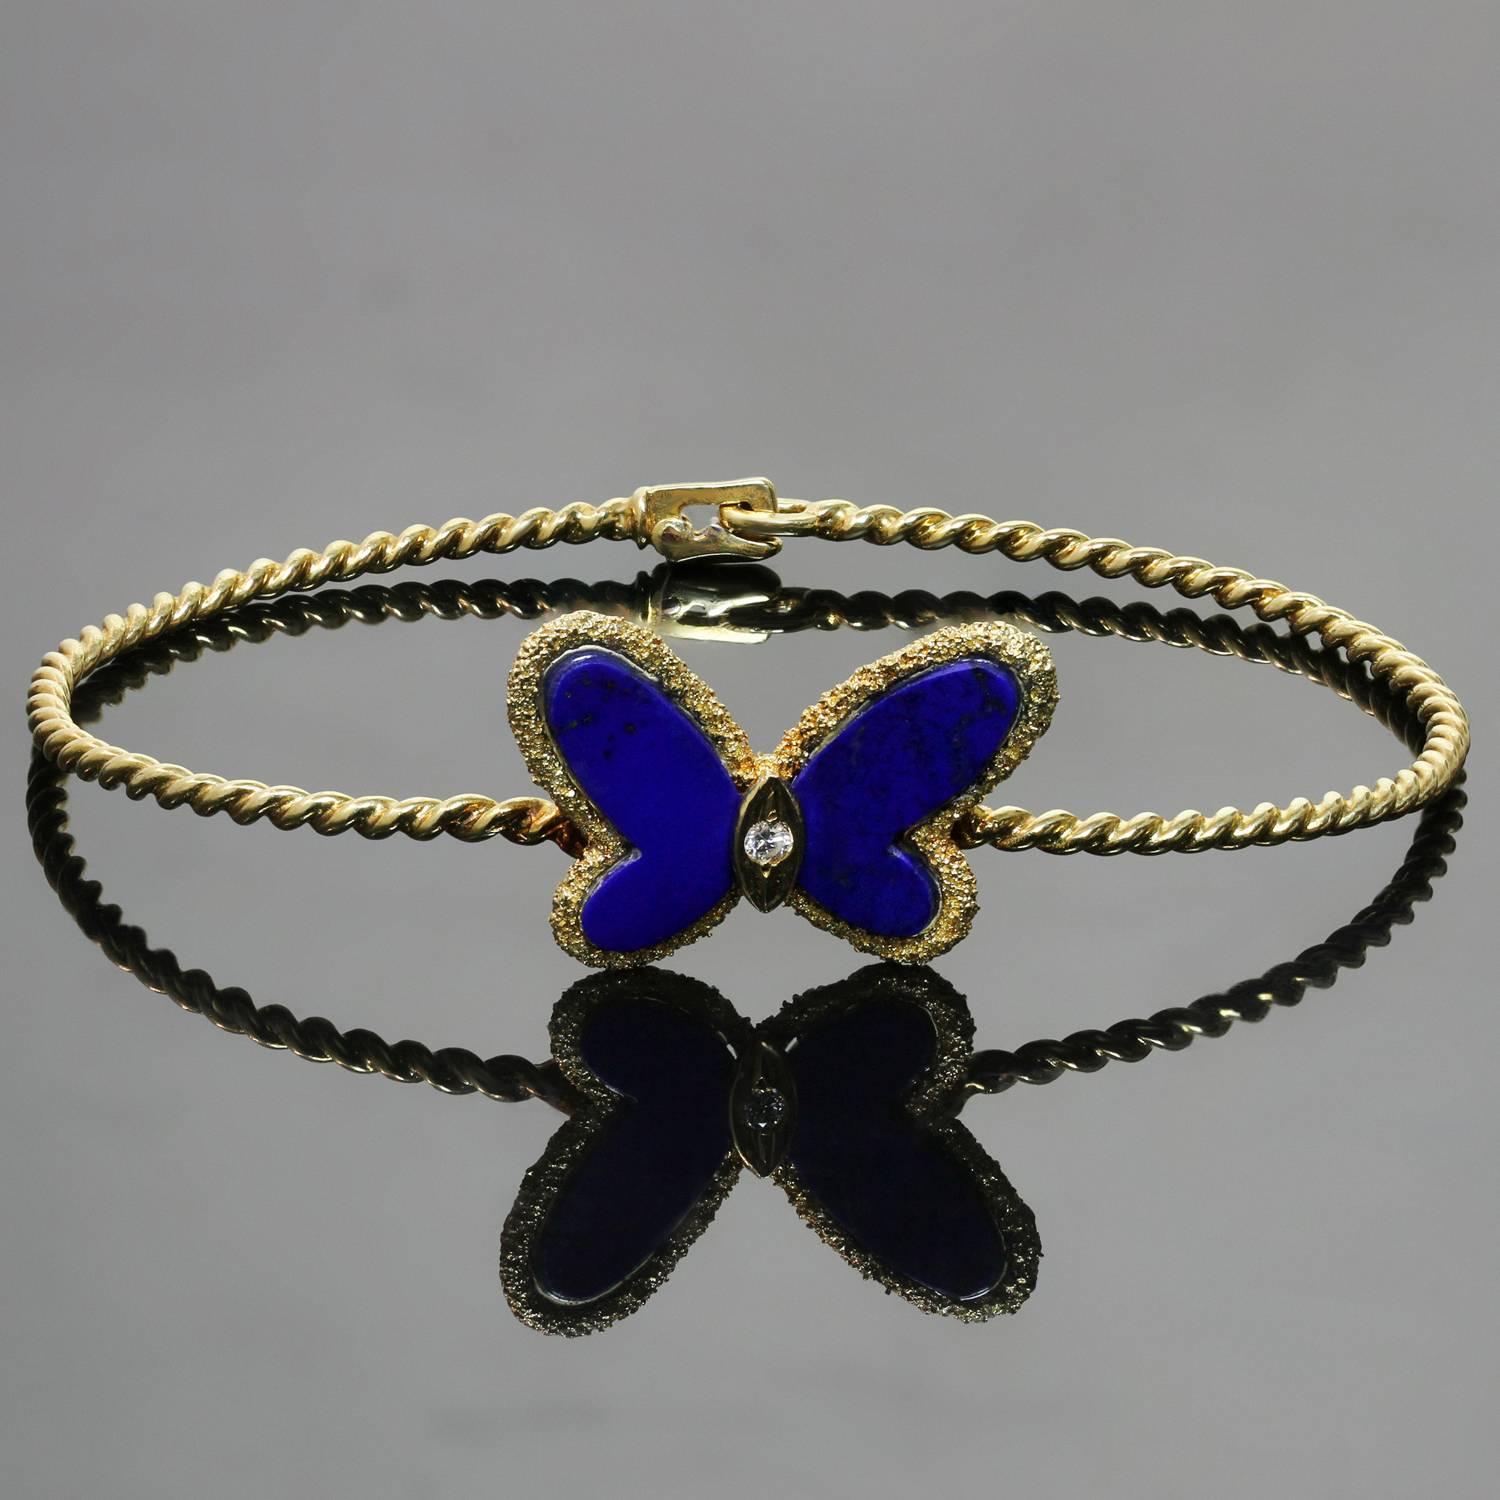 This stunning vintage Van Cleef & Arpels bracelet from the iconic Flying Beauties collection is crafted in textured 18k yellow gold and accented with a butterfly set with blue lapis lazuli wings and a solitaire brilliant-cut diamond of an estimated